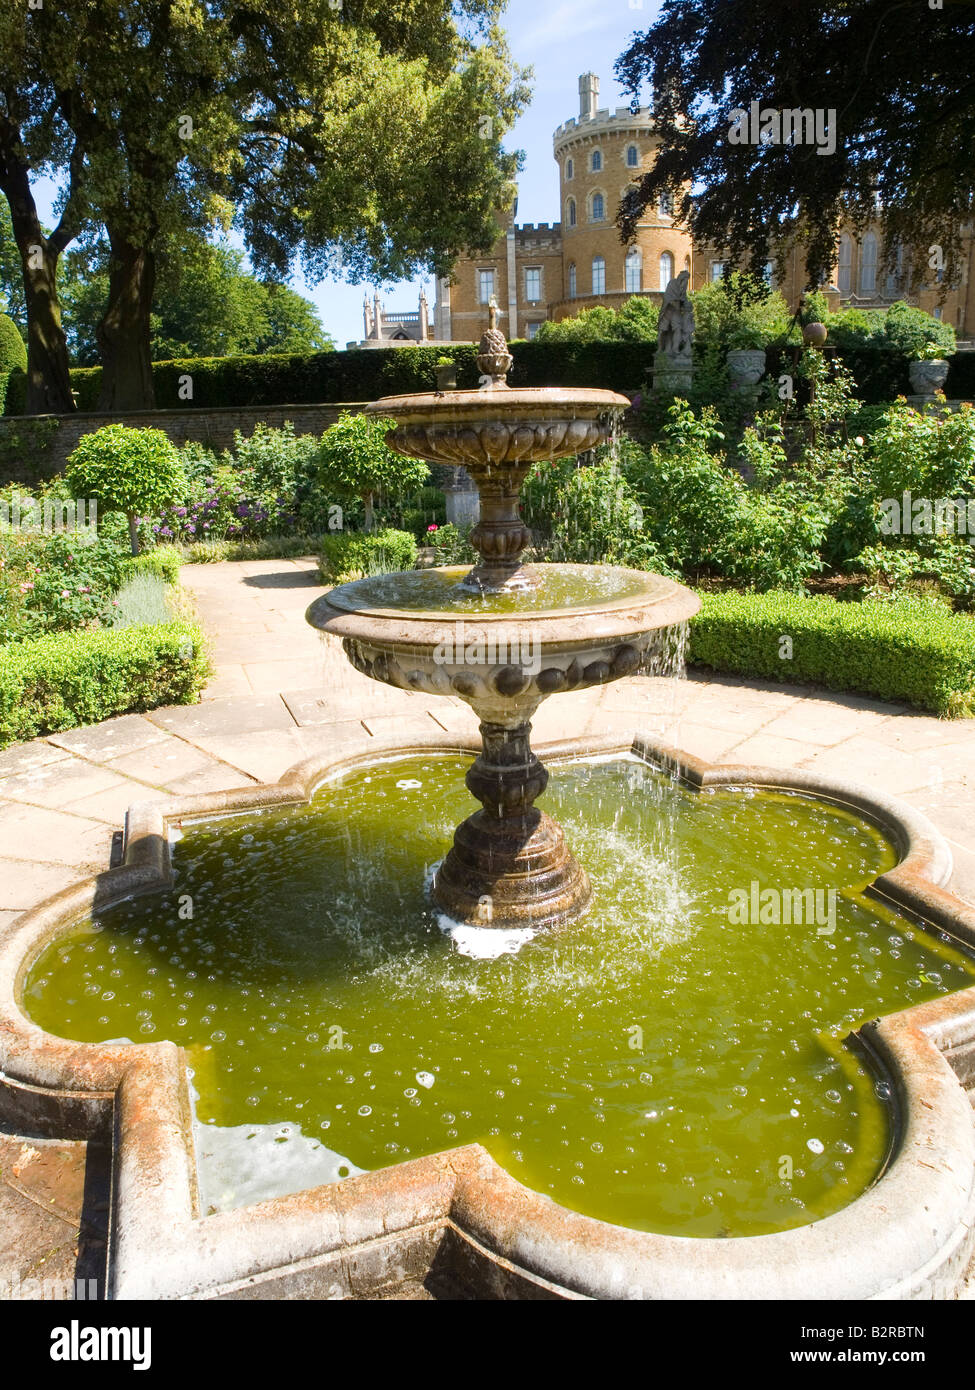 A fountain in the grounds of Belvoir Castle in Leicestershire, England UK Stock Photo